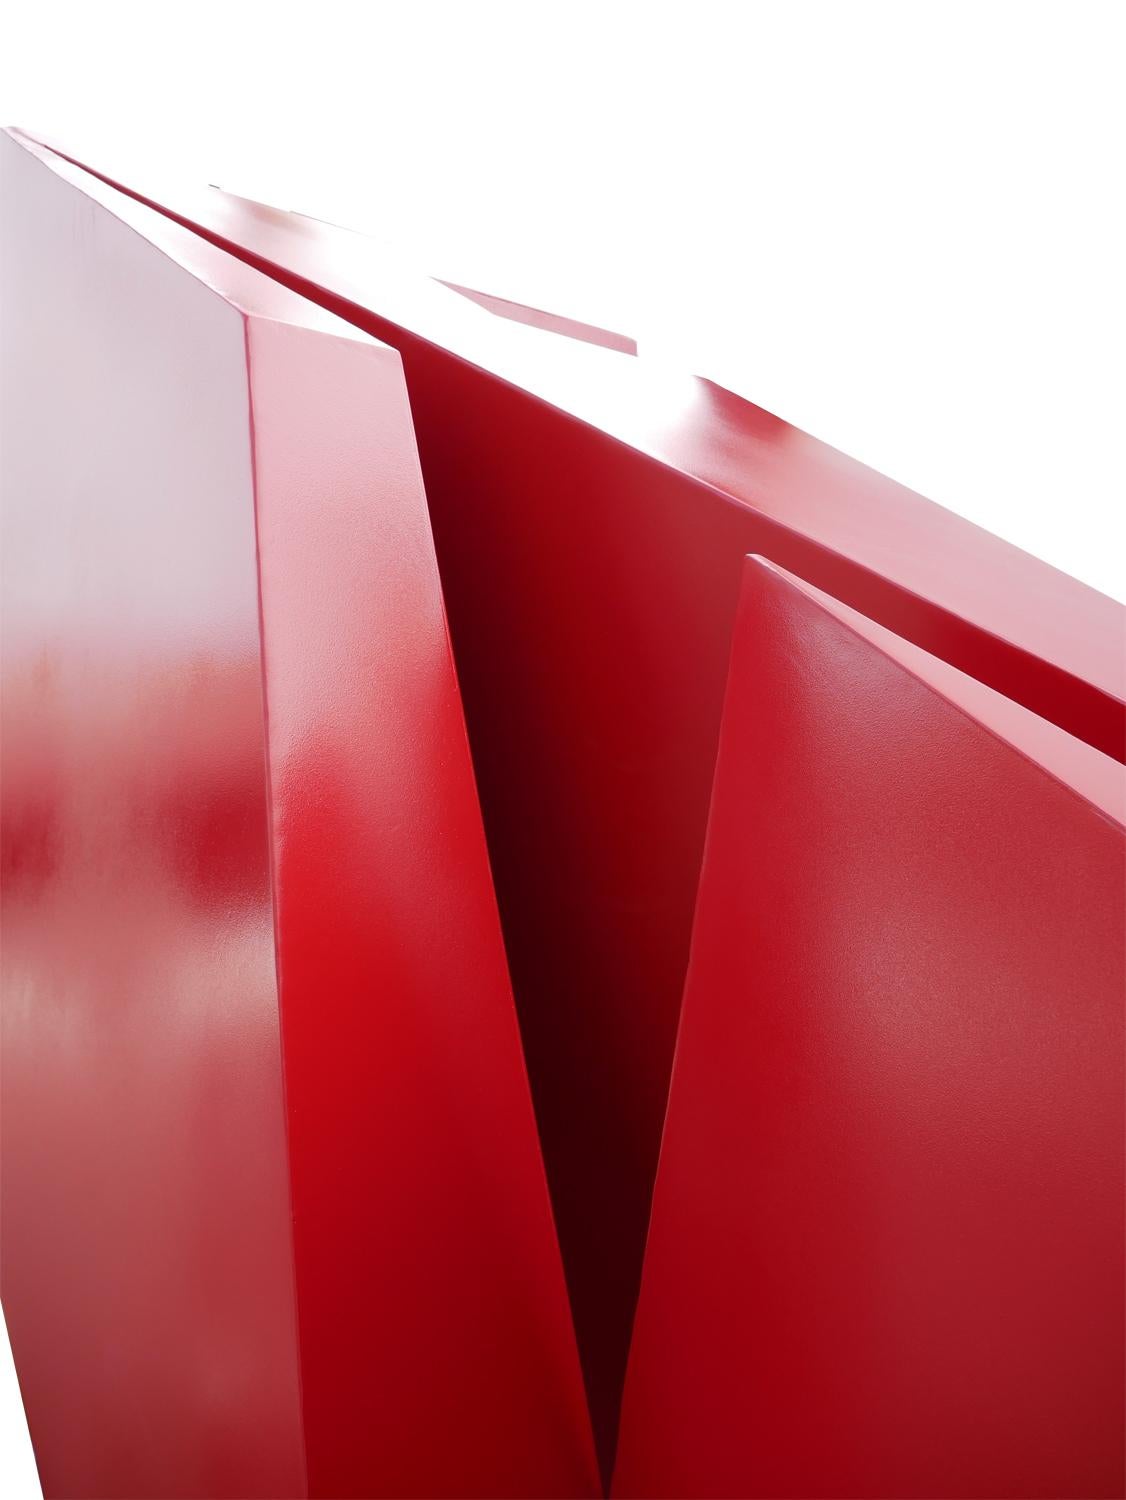 Large Contemporary Geometric Red Outdoor Sculpture  For Sale 6